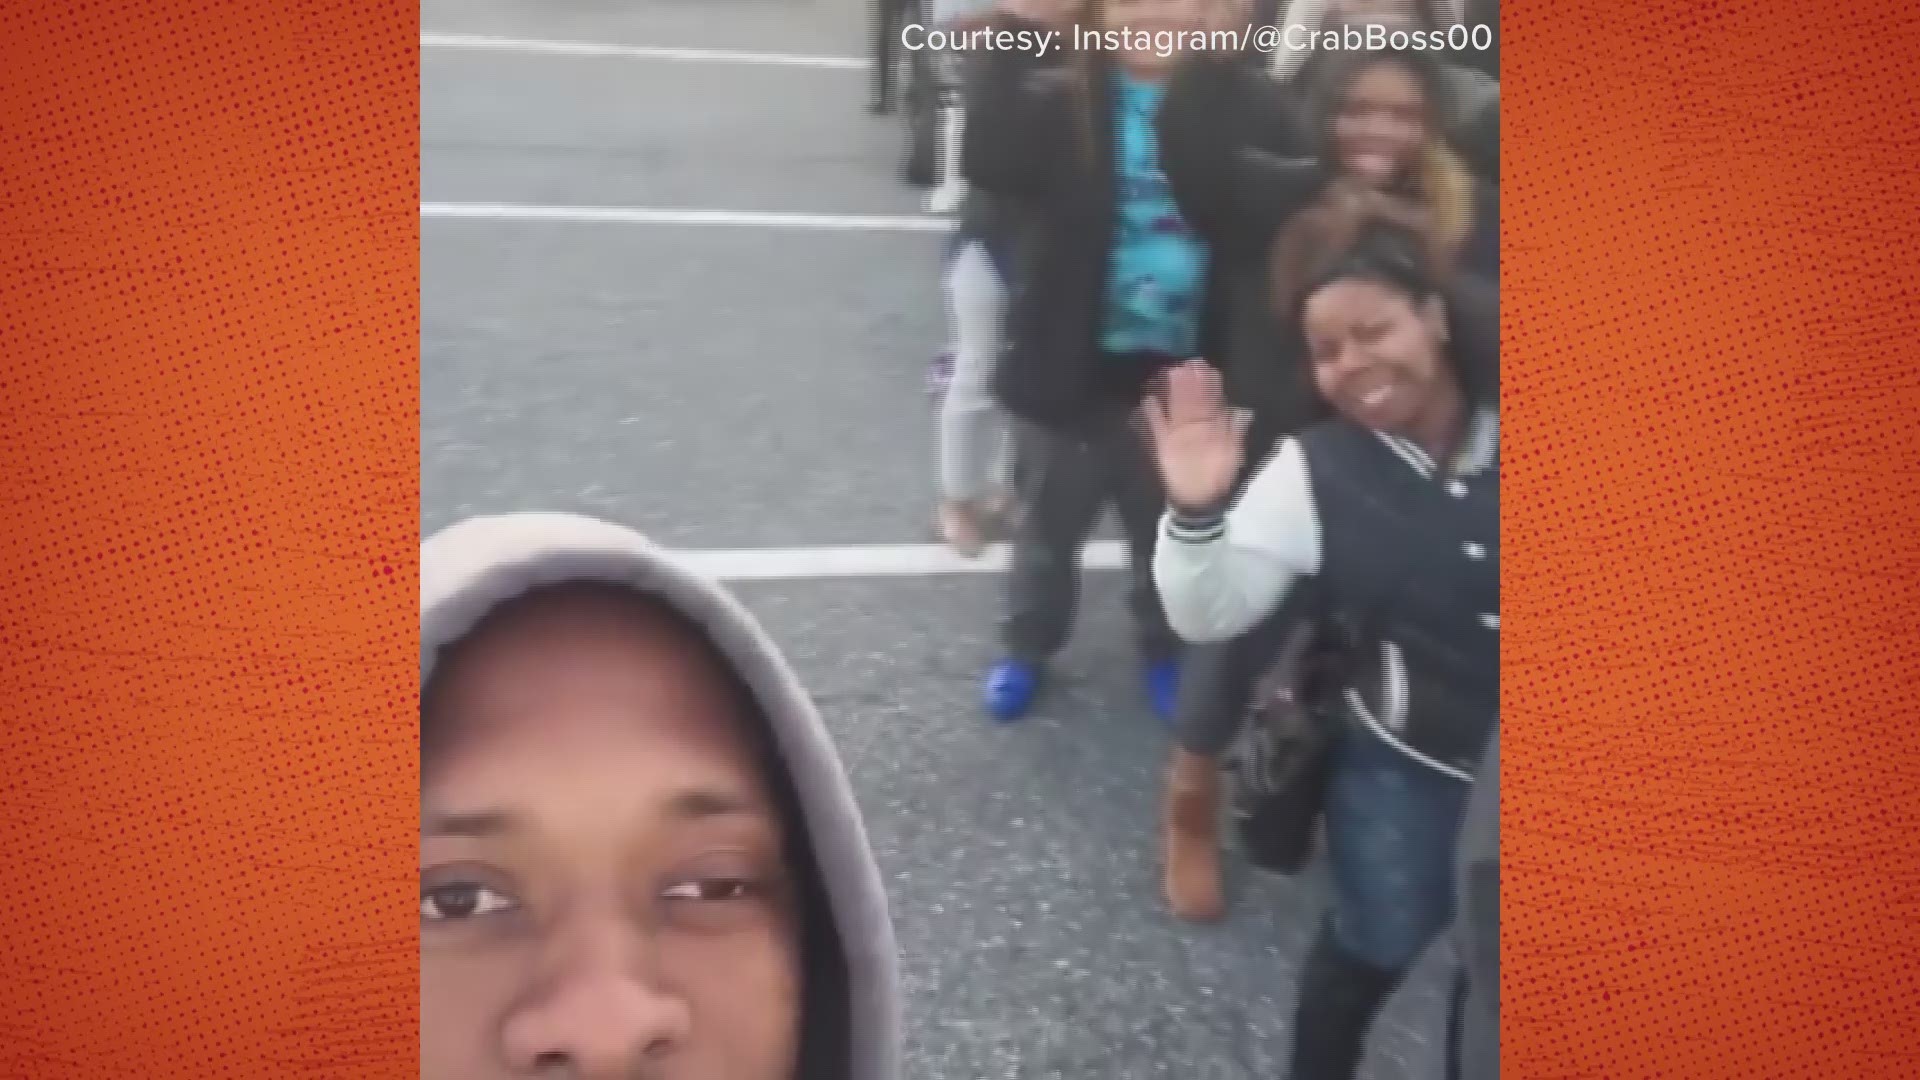 Watson posted several videos on his Instagram page that show dozens to more than one hundred people lined up in parking lots and sidewalks.
Watson has more than 120,000 followers on his social media page.